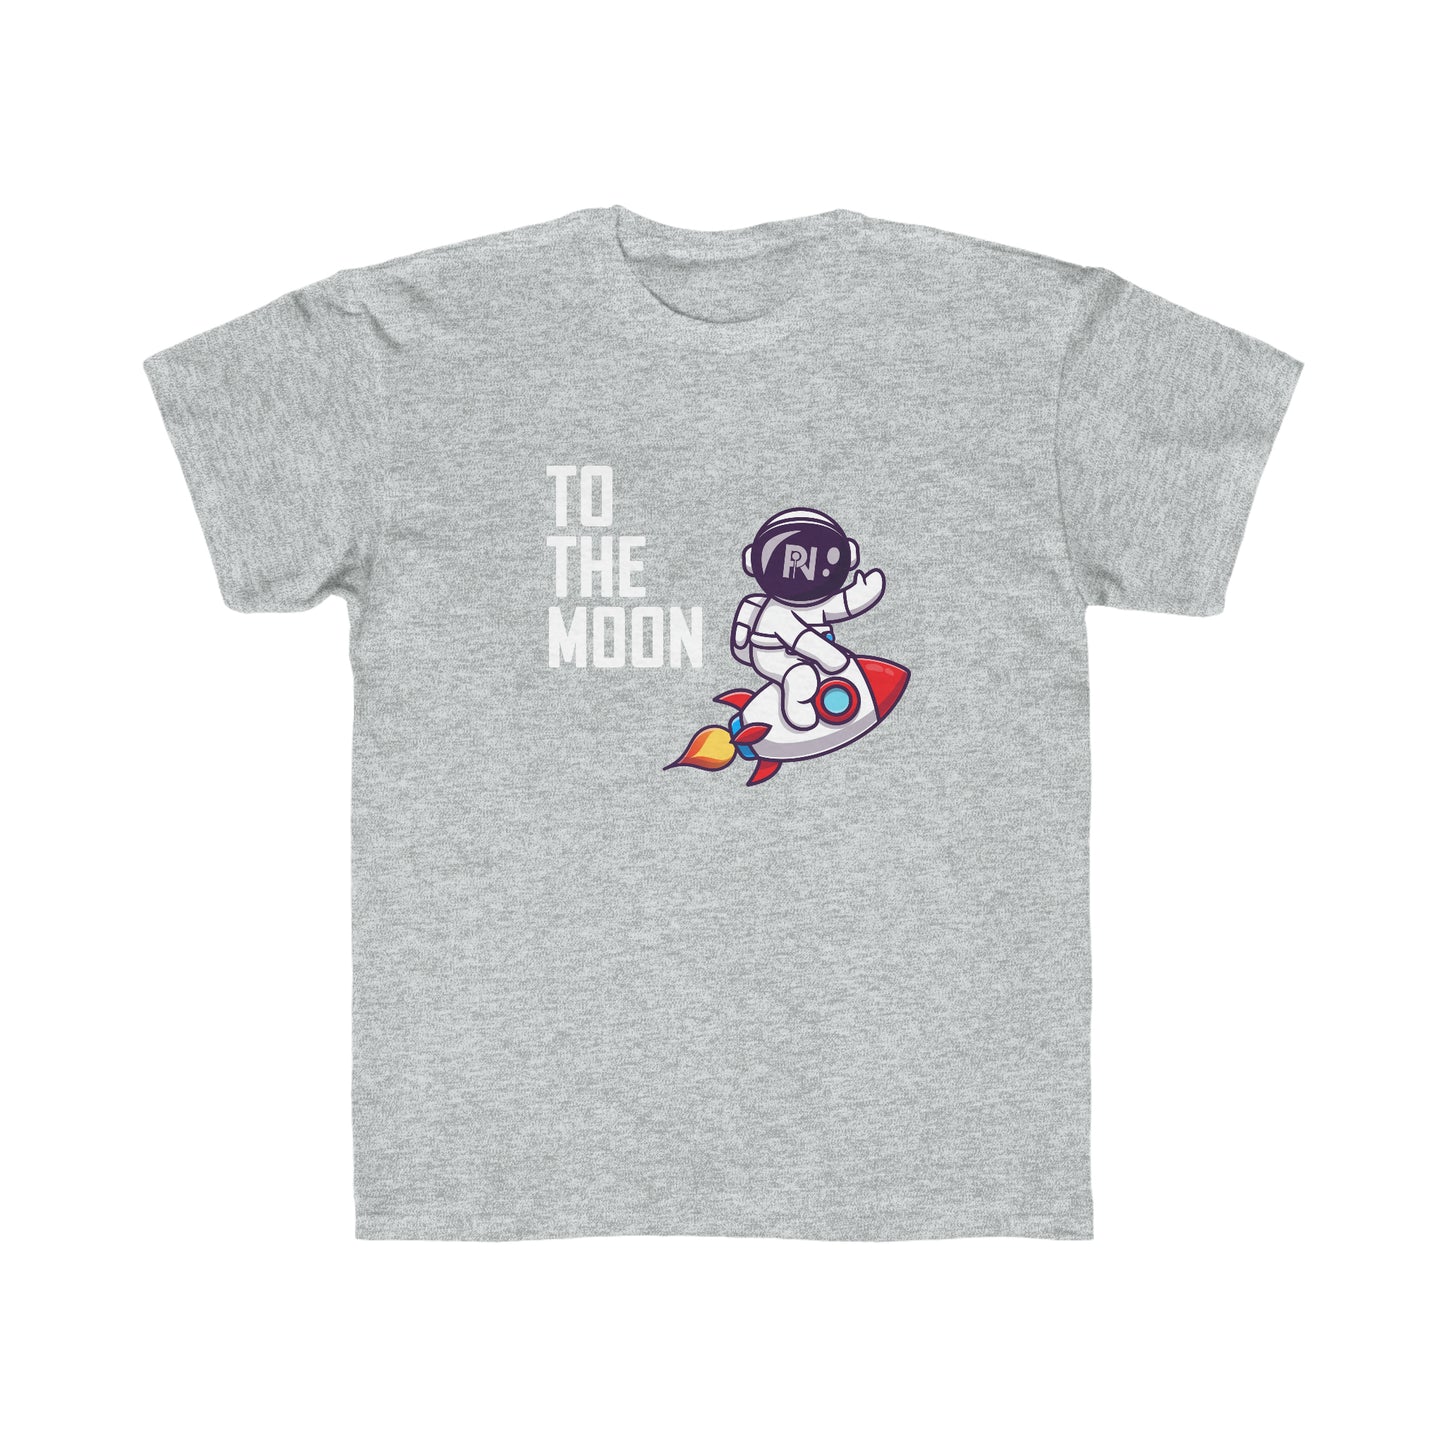 Kids Regular Fit Tee (To THE MOON.)